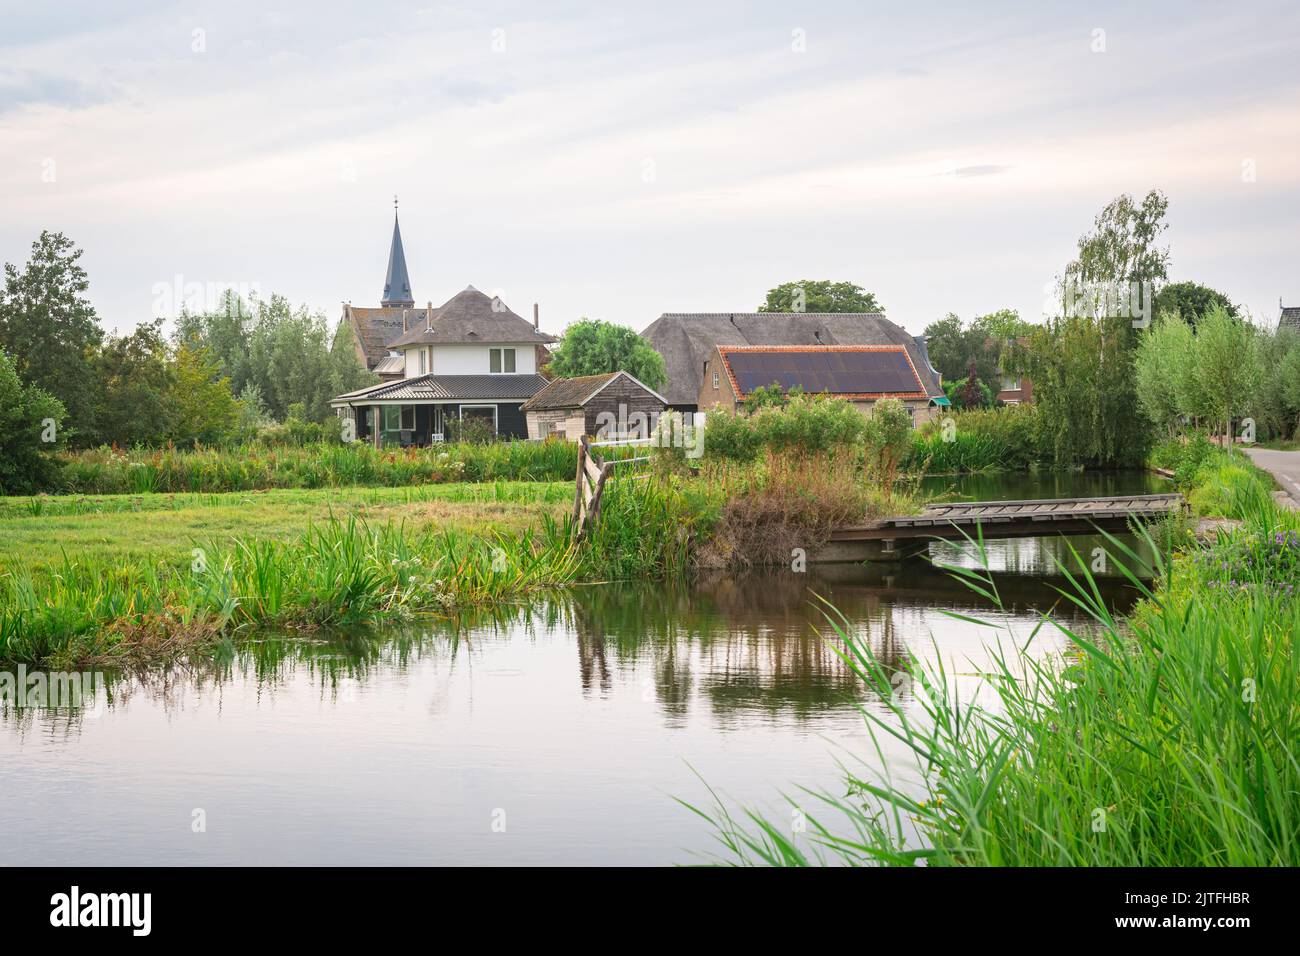 dyllic image of the village of Reeuwijk-Dorp and the surrounding watery countryside Stock Photo